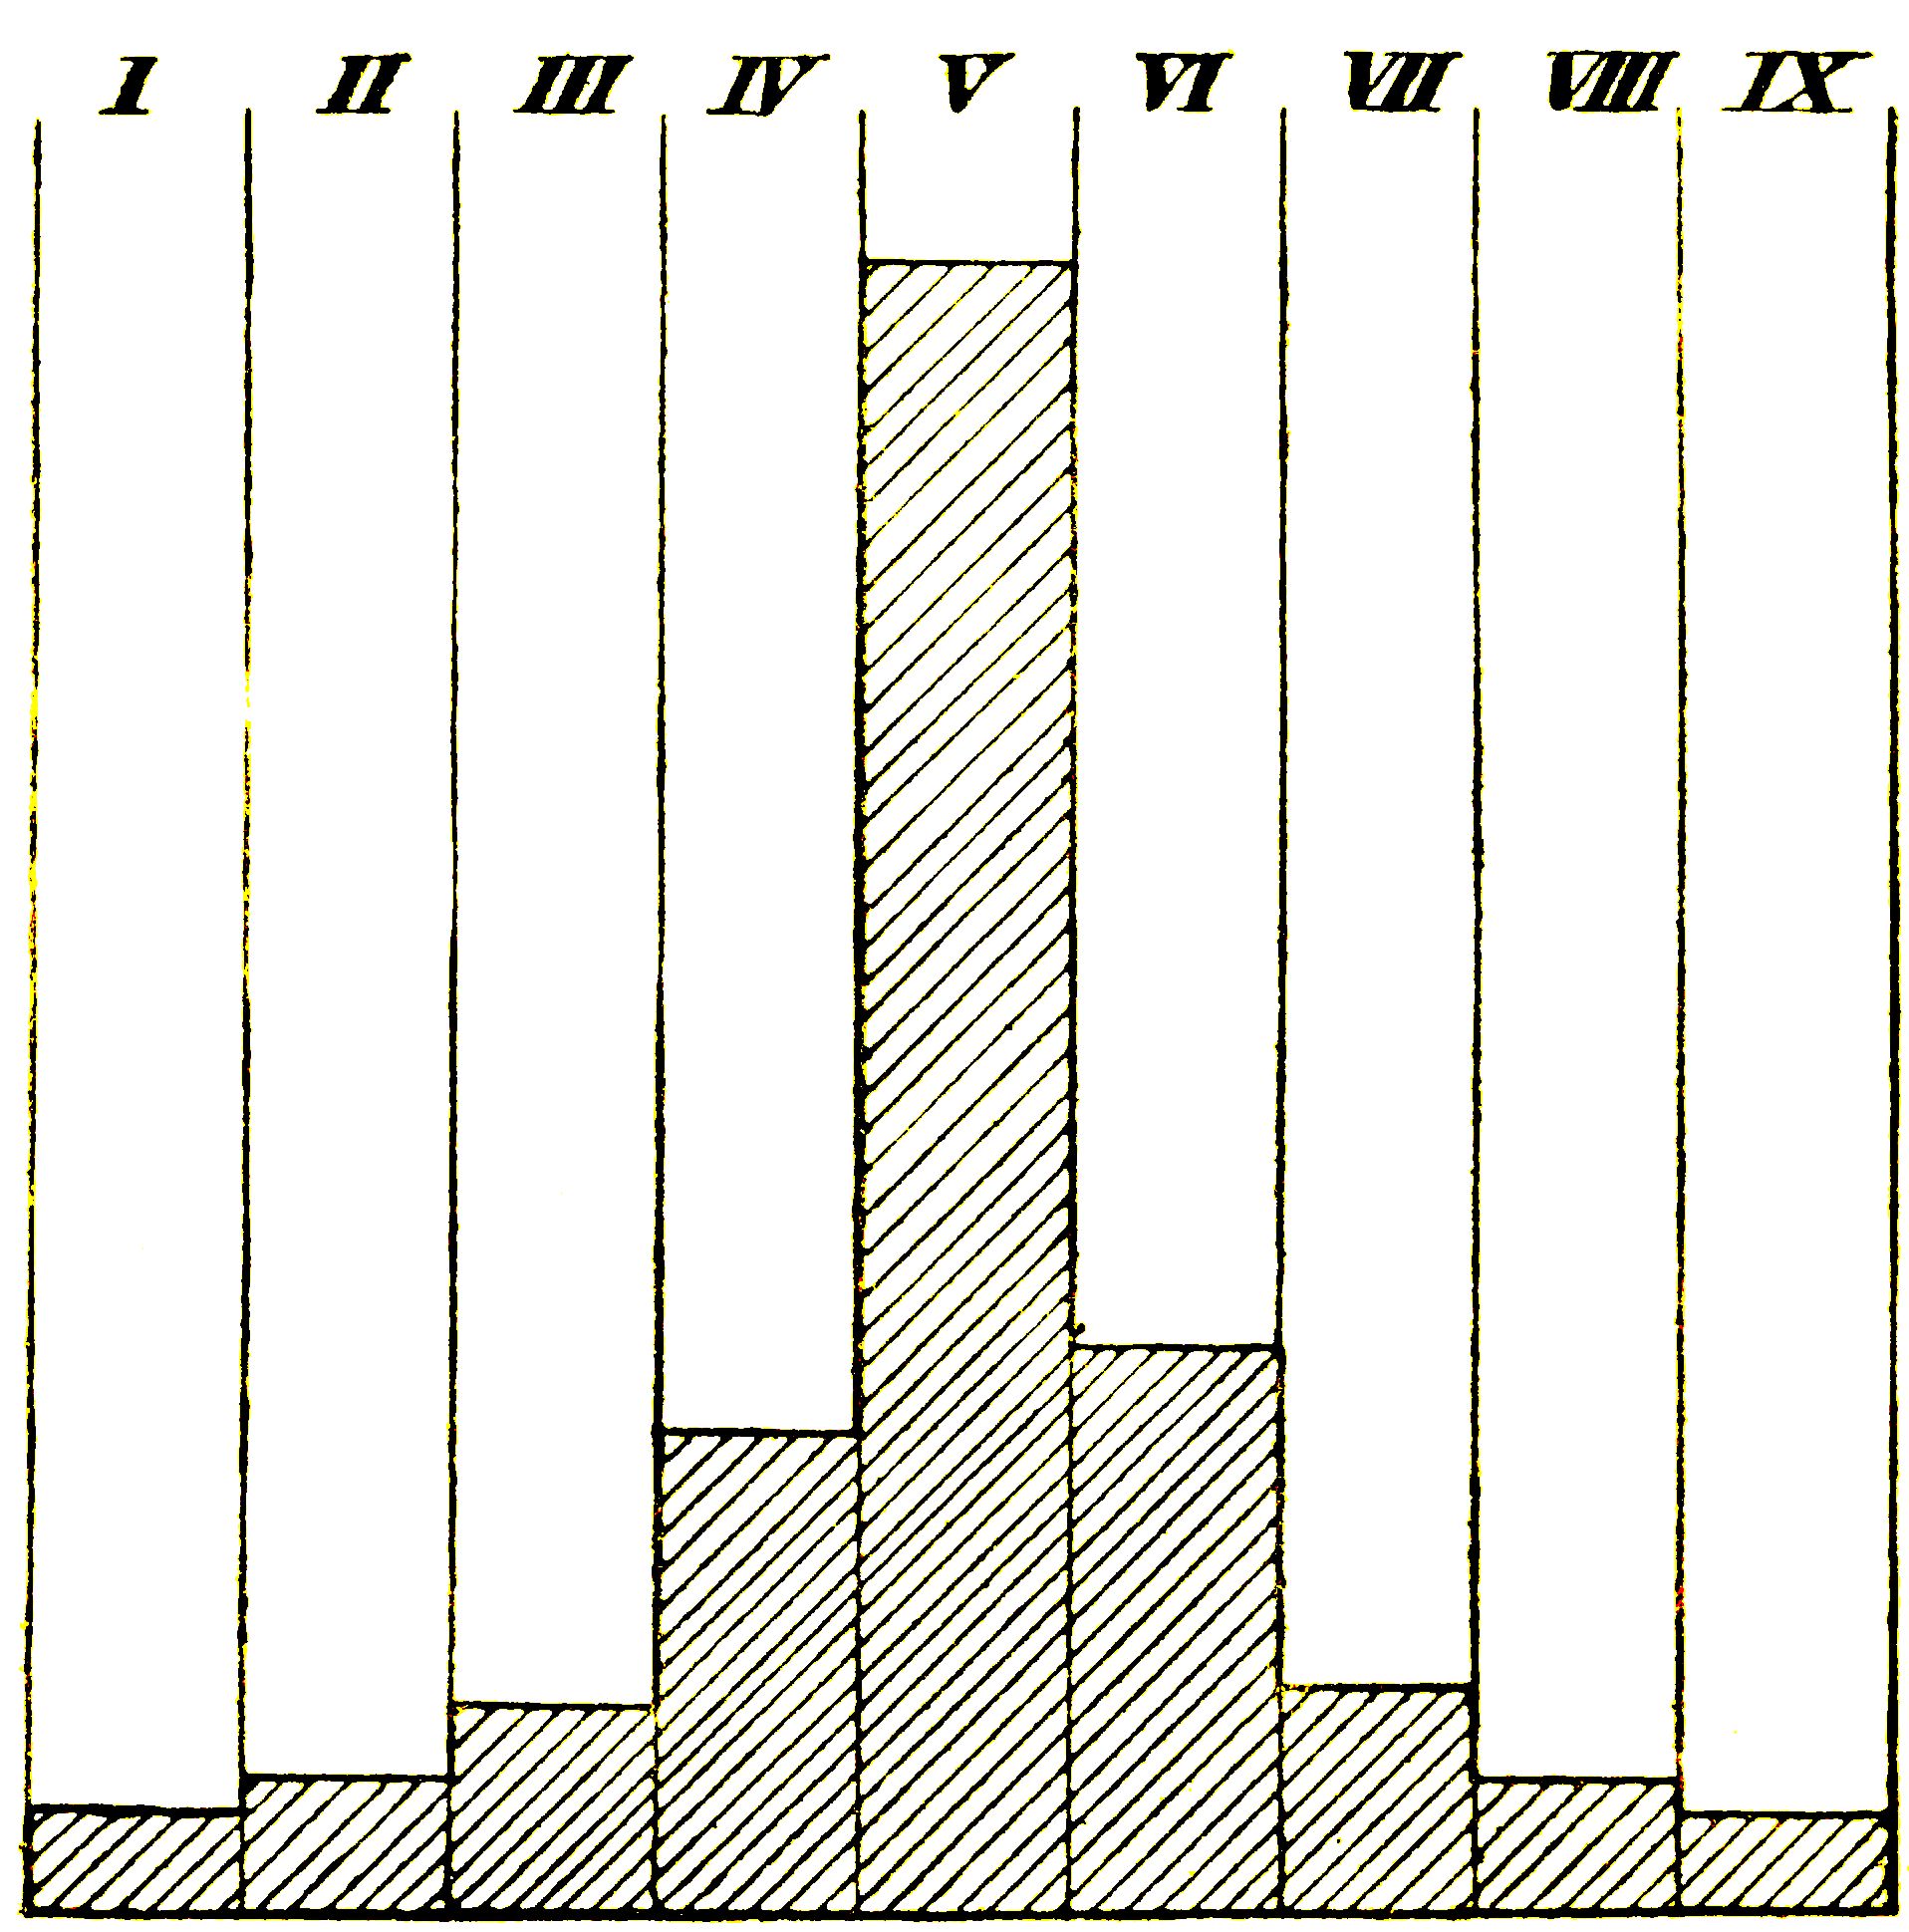 DIAGRAM OF STAR-DENSITY
From Herschel's Gauges (as given by Professor Newcomb, p. 251).